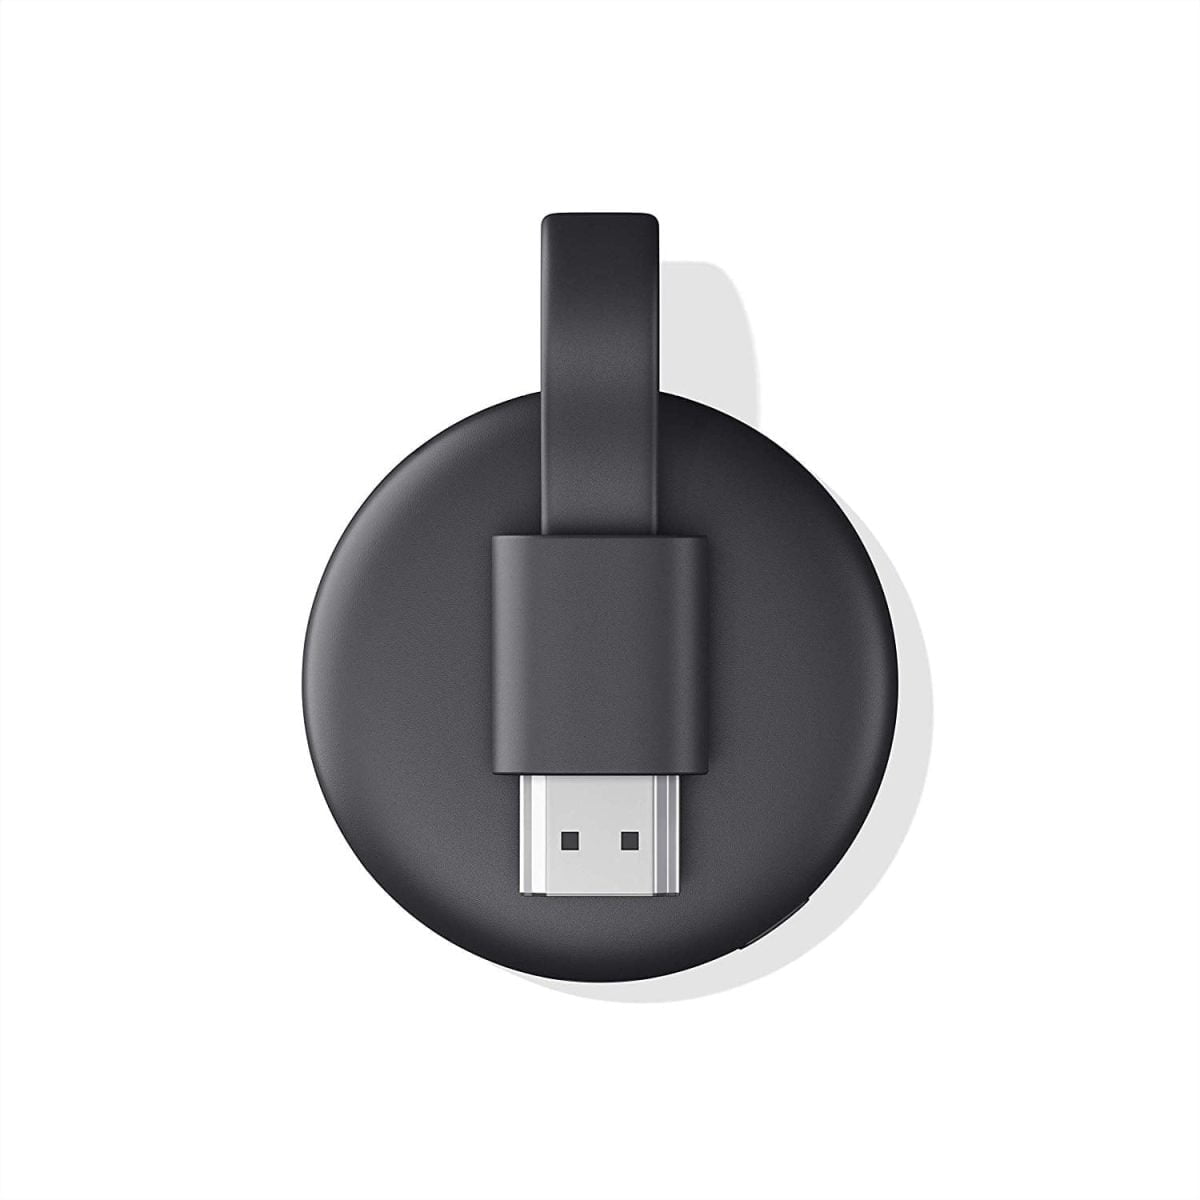 Google Chromecast 3Rd Gneration Media Streamer2 Google &Lt;Div Class=&Quot;Jsx-115903991 Jsx-3349621030&Quot;&Gt; &Lt;Div Class=&Quot;Jsx-1889249662 Overviewsection&Quot;&Gt;Google Chromecast 3 Makes Your Tv Smarter! You Can Now Stream Entertainment Directly From Your Phone And Other Devices To Your Tv. Use Your Phone Or Device To Stream Tv Shows, Movies, Games And More From 800+ Plus Compatible Apps, Including Youtube, Netflix, Hotstar, Sonyliv, Gaana Etc. With 15% Higher Hardware Speed, The New Chromecast Supports 1080P And Is Google Assistant-Enabled. Chromecast Plugs Into Your Tv'S Hdmi Port And Works With Iphone, Ipad, Android Phone And Tablet, Mac And Windows Laptop And Chromebook. During Streaming, Your Device Is Free To Be Used For Calls, Messages Without Interrupting The Tv Screen. You Can Control The Playback From Any Part Of The Wifi-Enabled House. No Additional Remote(S) Required.&Lt;/Div&Gt; &Lt;/Div&Gt; &Nbsp; Google Chromecast 3Rd Gneration Media Streamer